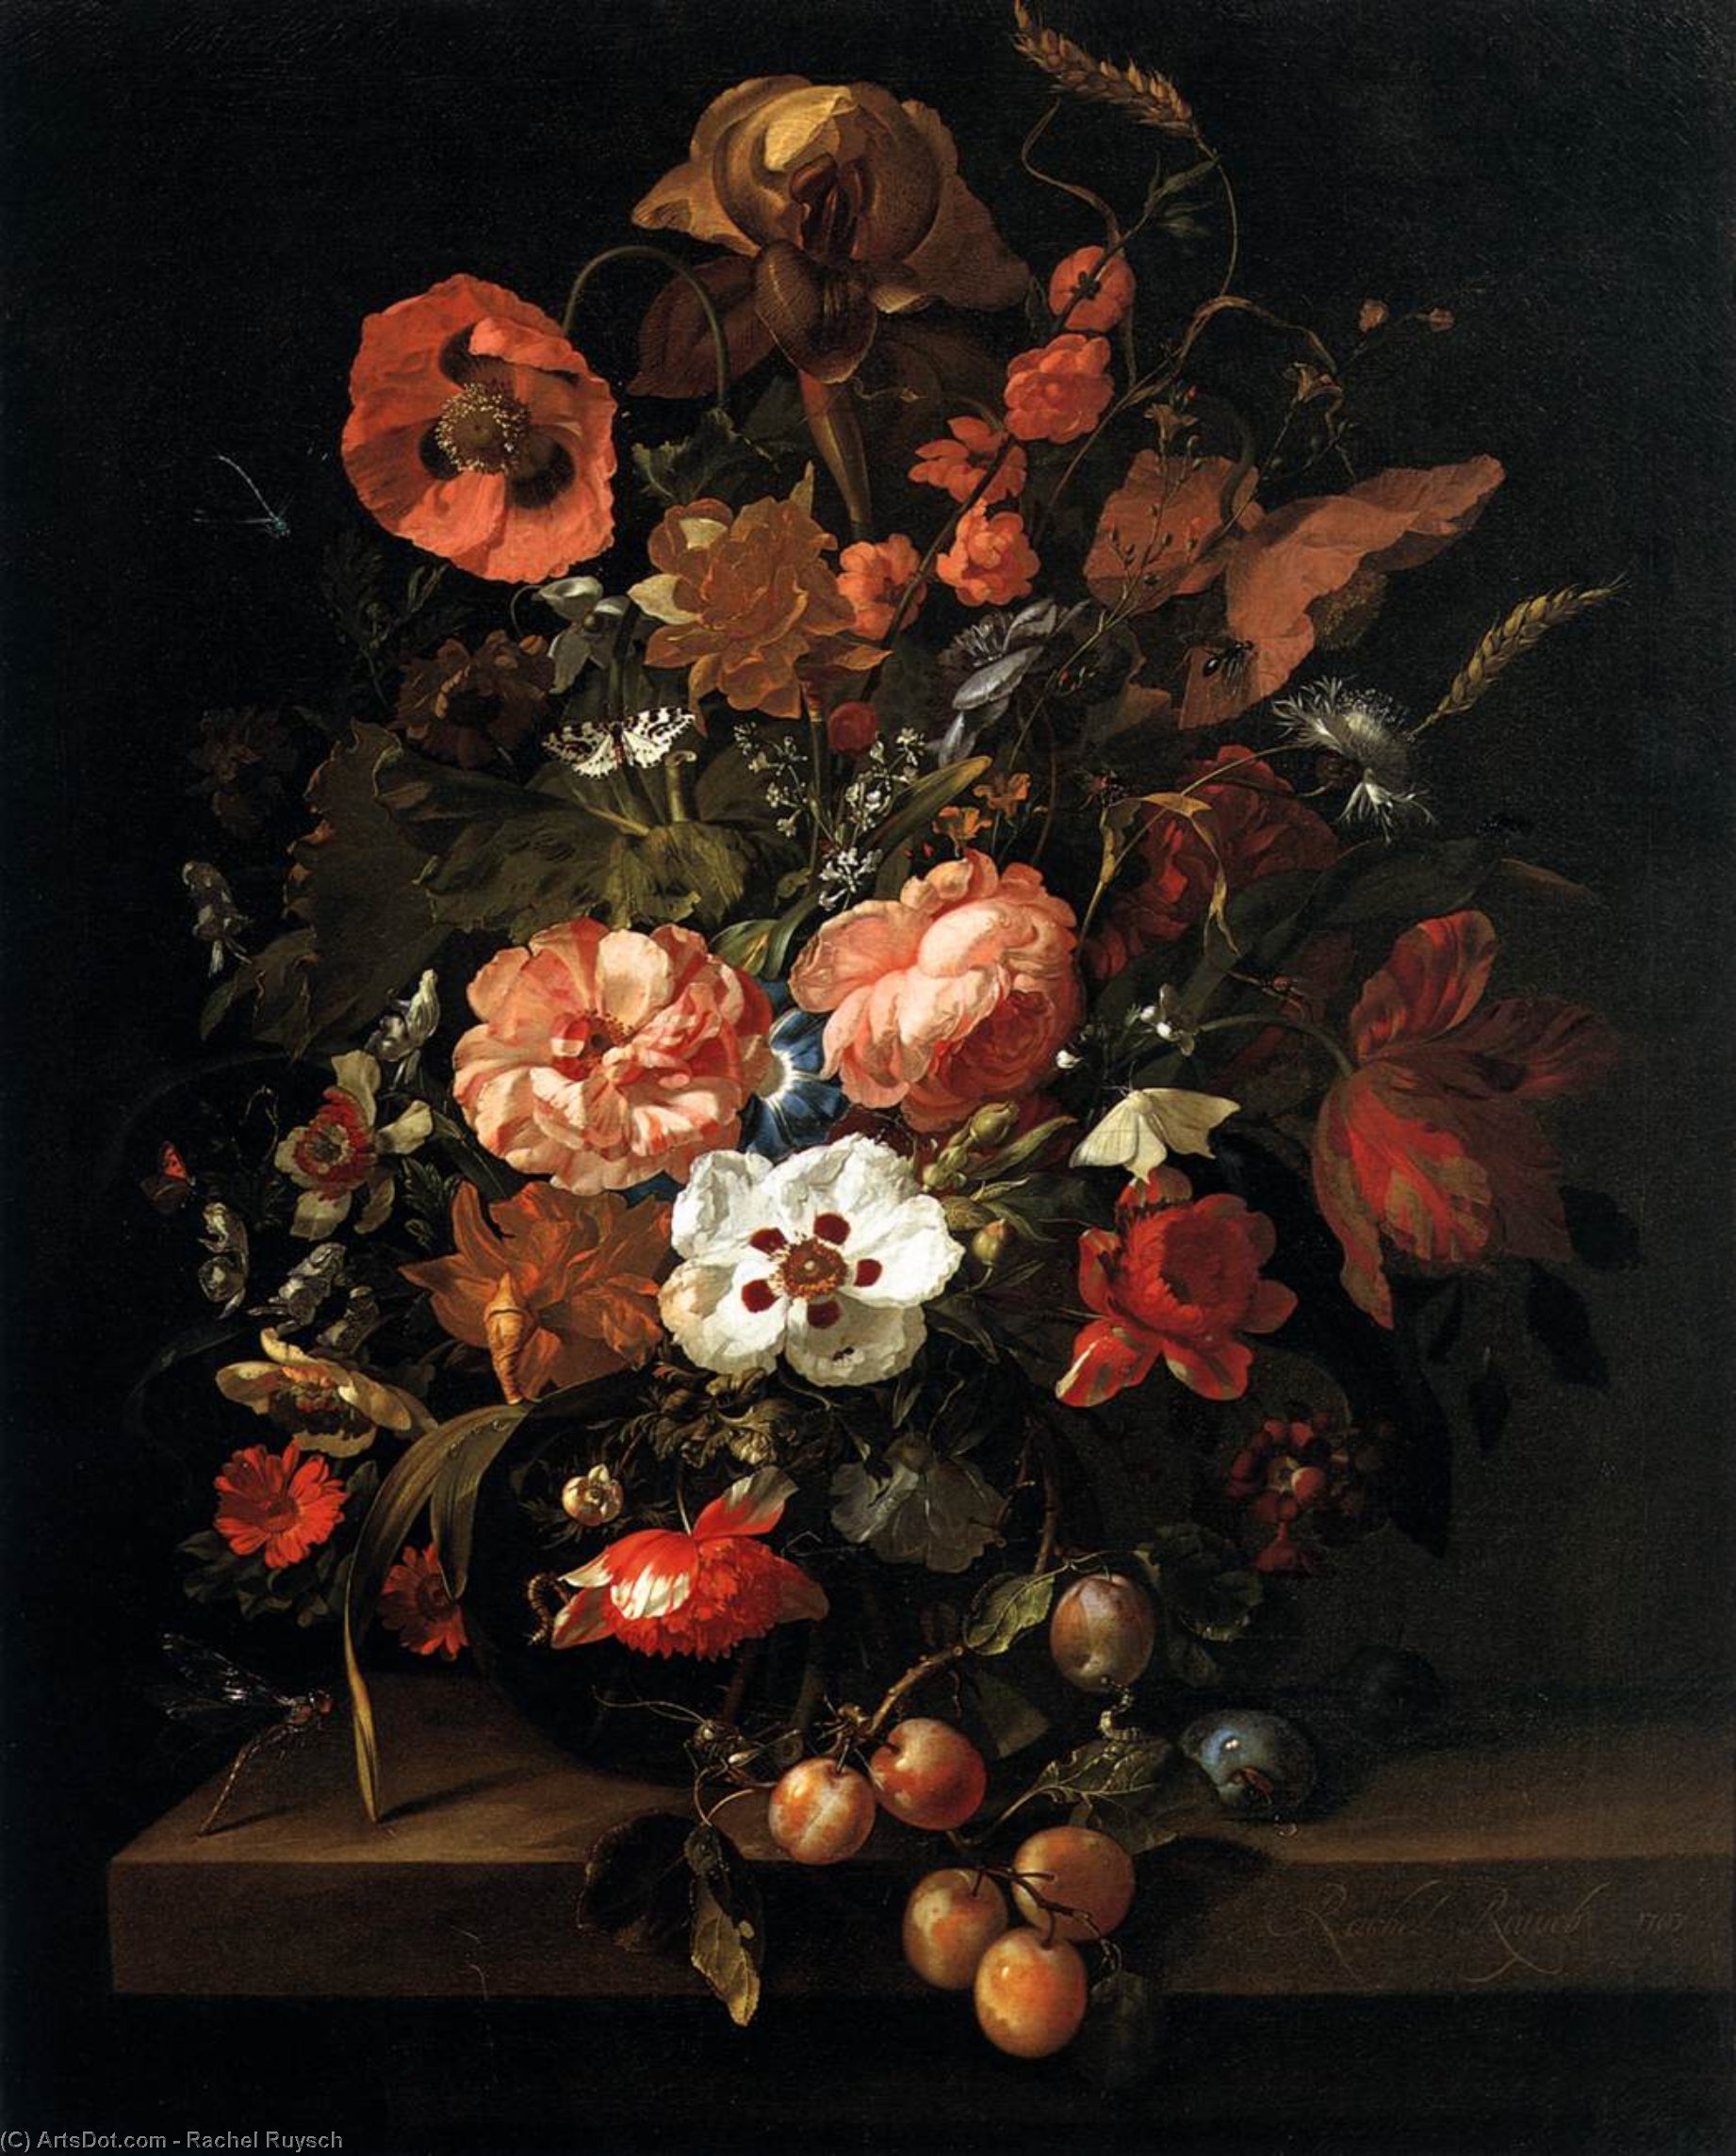 Order Paintings Reproductions Bouquet in a Glass Vase, 1703 by Rachel Ruysch (1664-1750, Netherlands) | ArtsDot.com